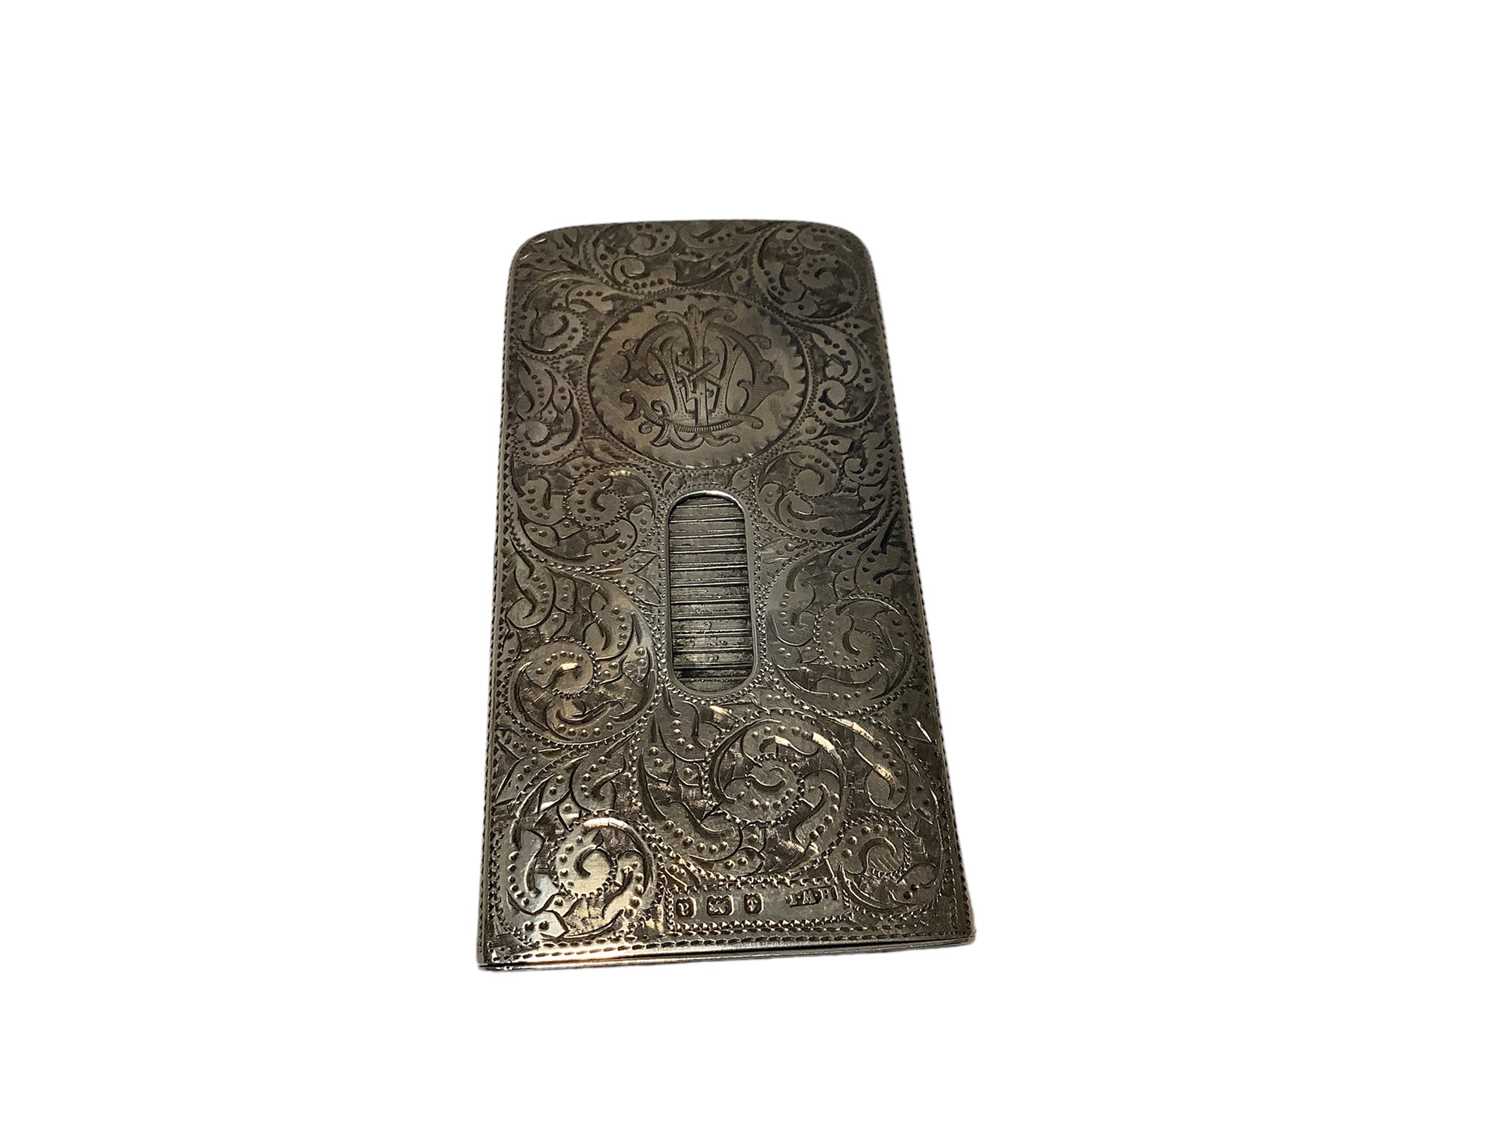 Lot 78 - Good quality Victorian Needham's Patent silver card case with floral scroll engraved decoration ( Birmingham 1900) 84 x 42mm